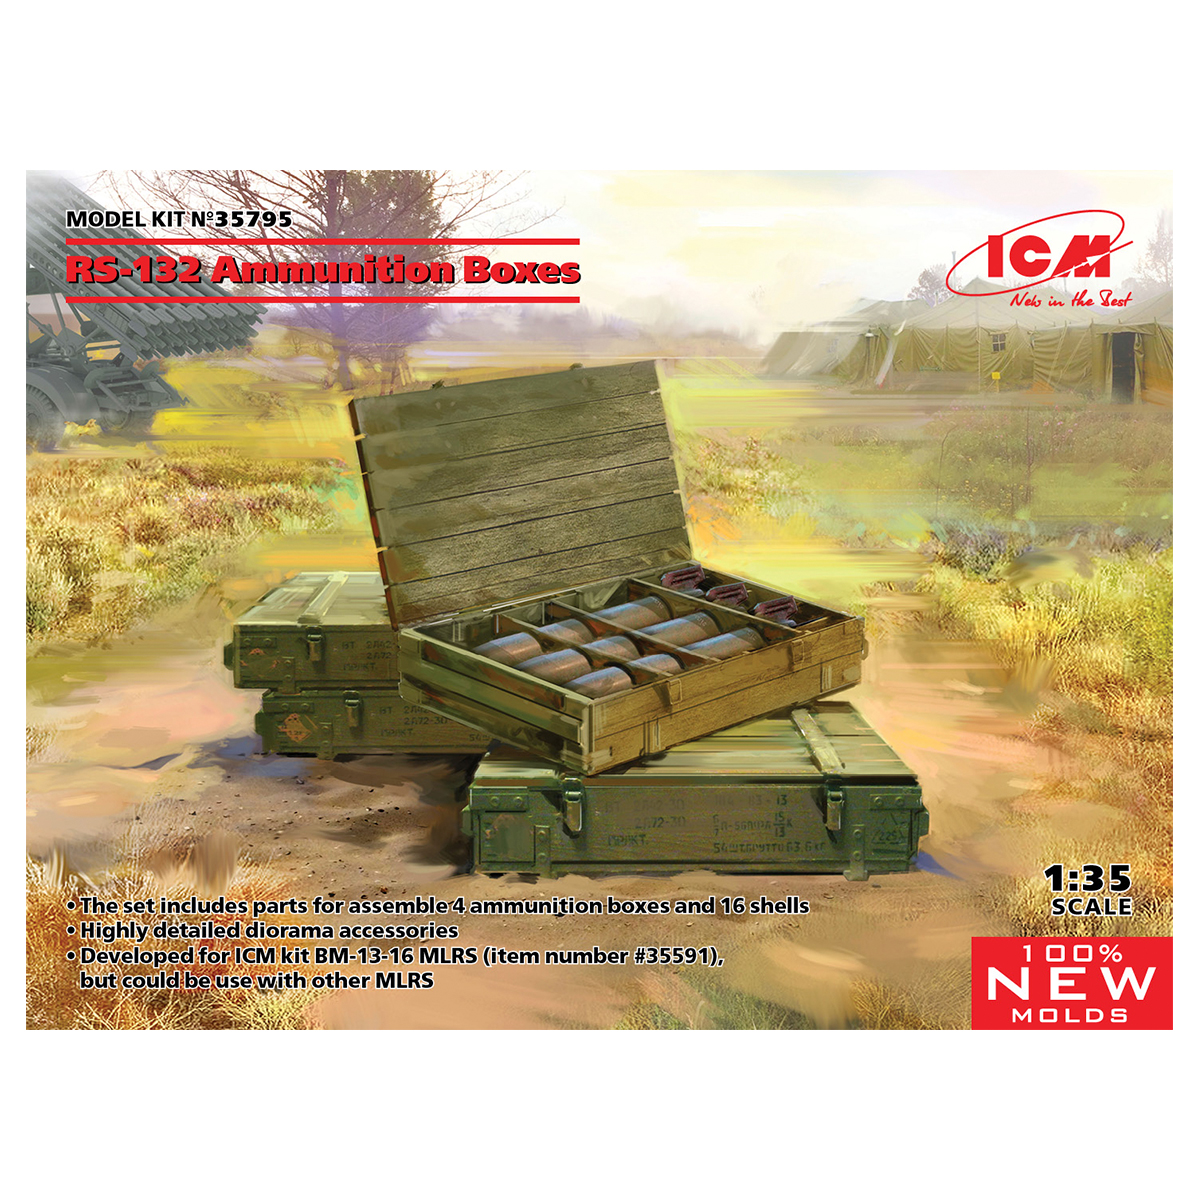 RS-132 Ammunition Boxes (100% new molds) 1/35